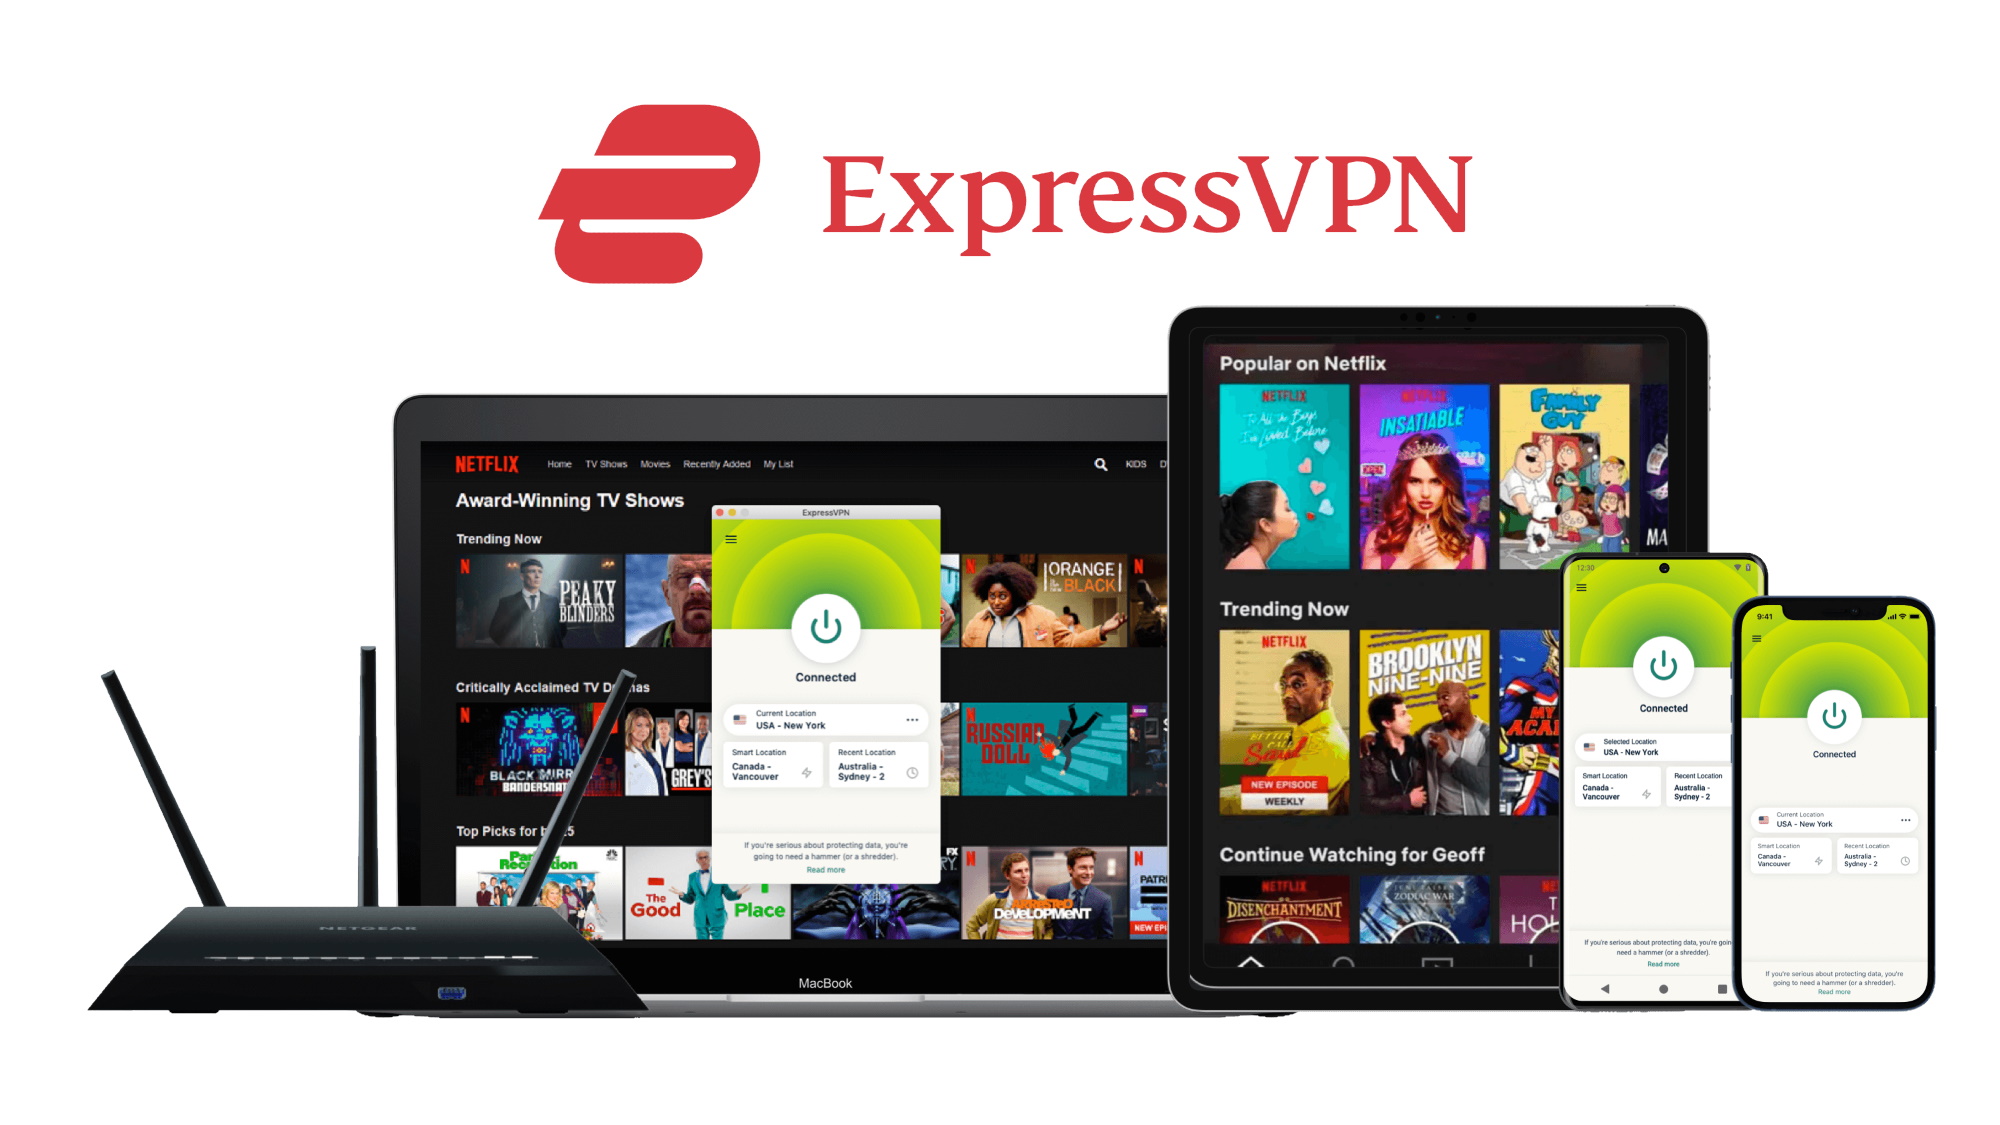 ExpressVPN accessing Netflix on a laptop, tablet, and phone